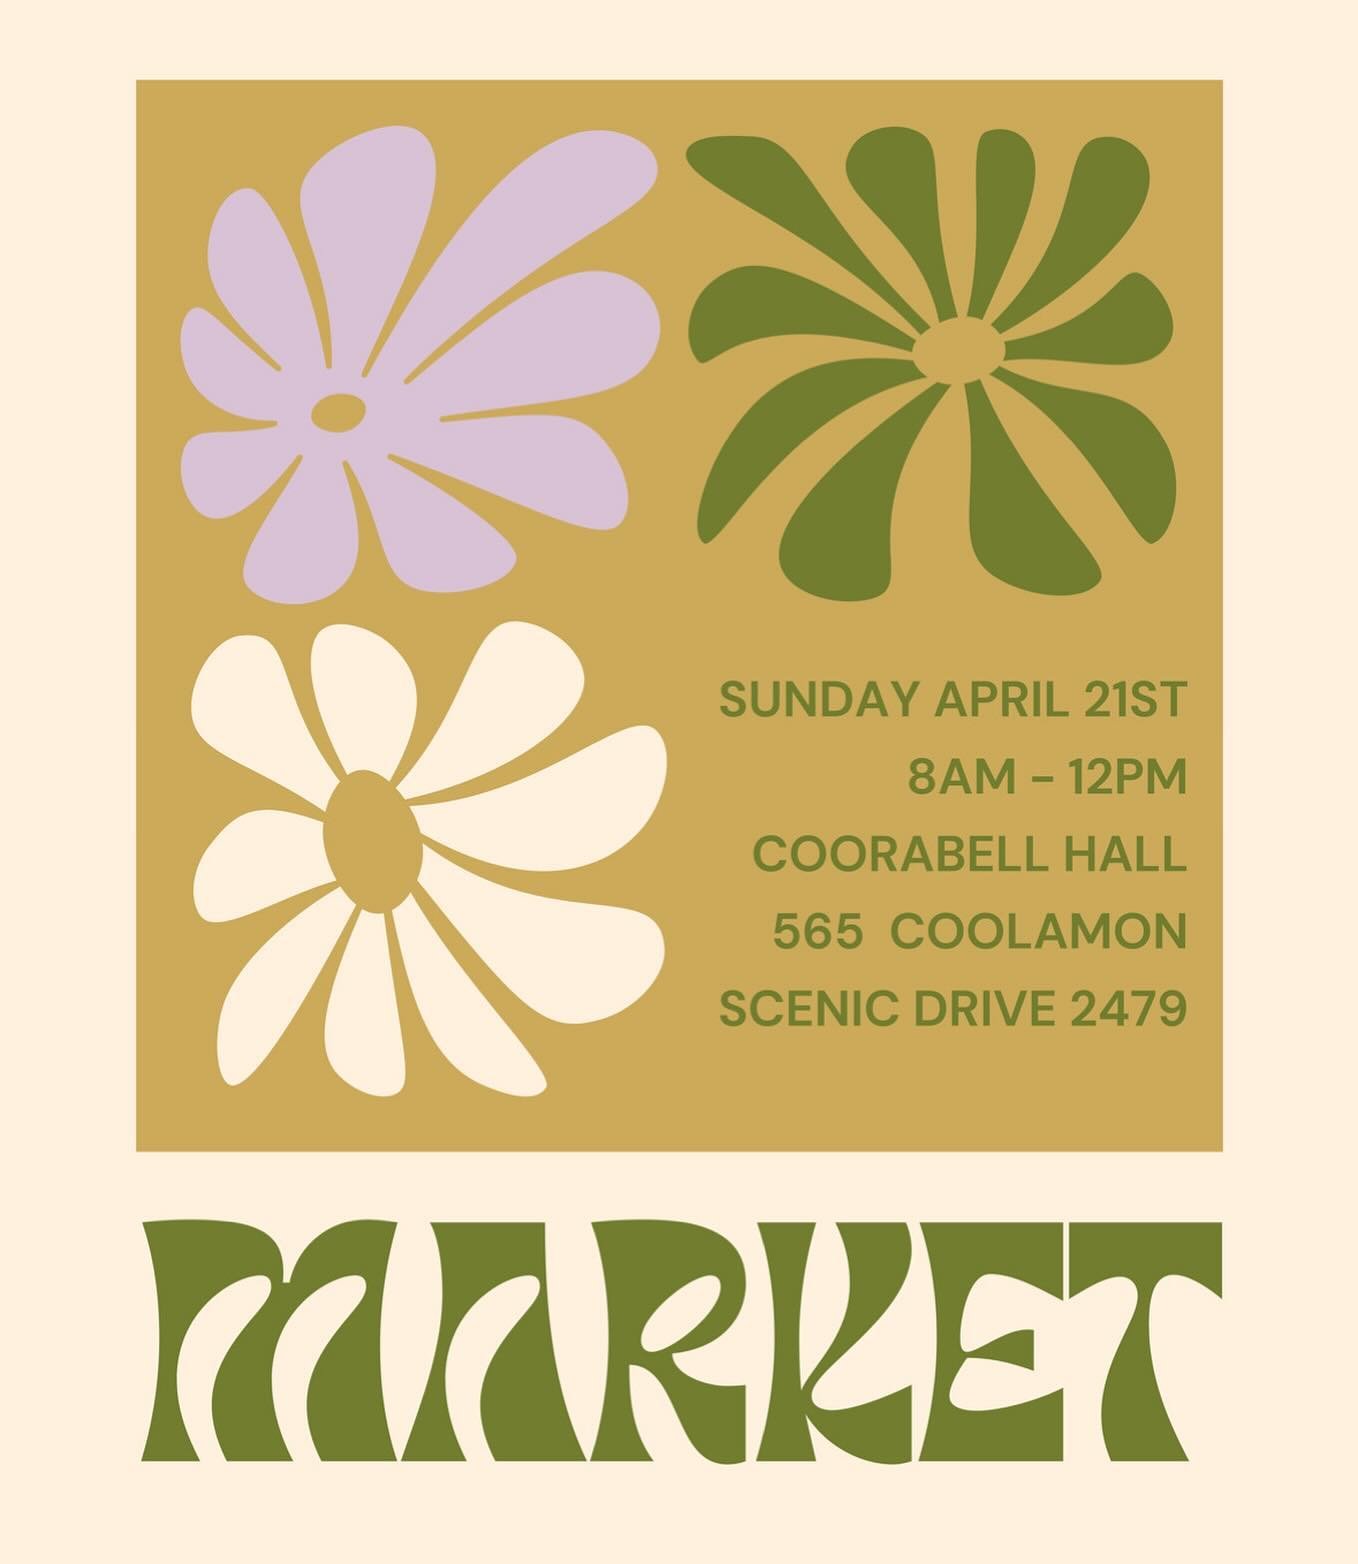 Join us this Sunday for a flea market! 🛍️ Many stalls with clothes, shoes and other goodies available ⭐️ Hope to see you there!